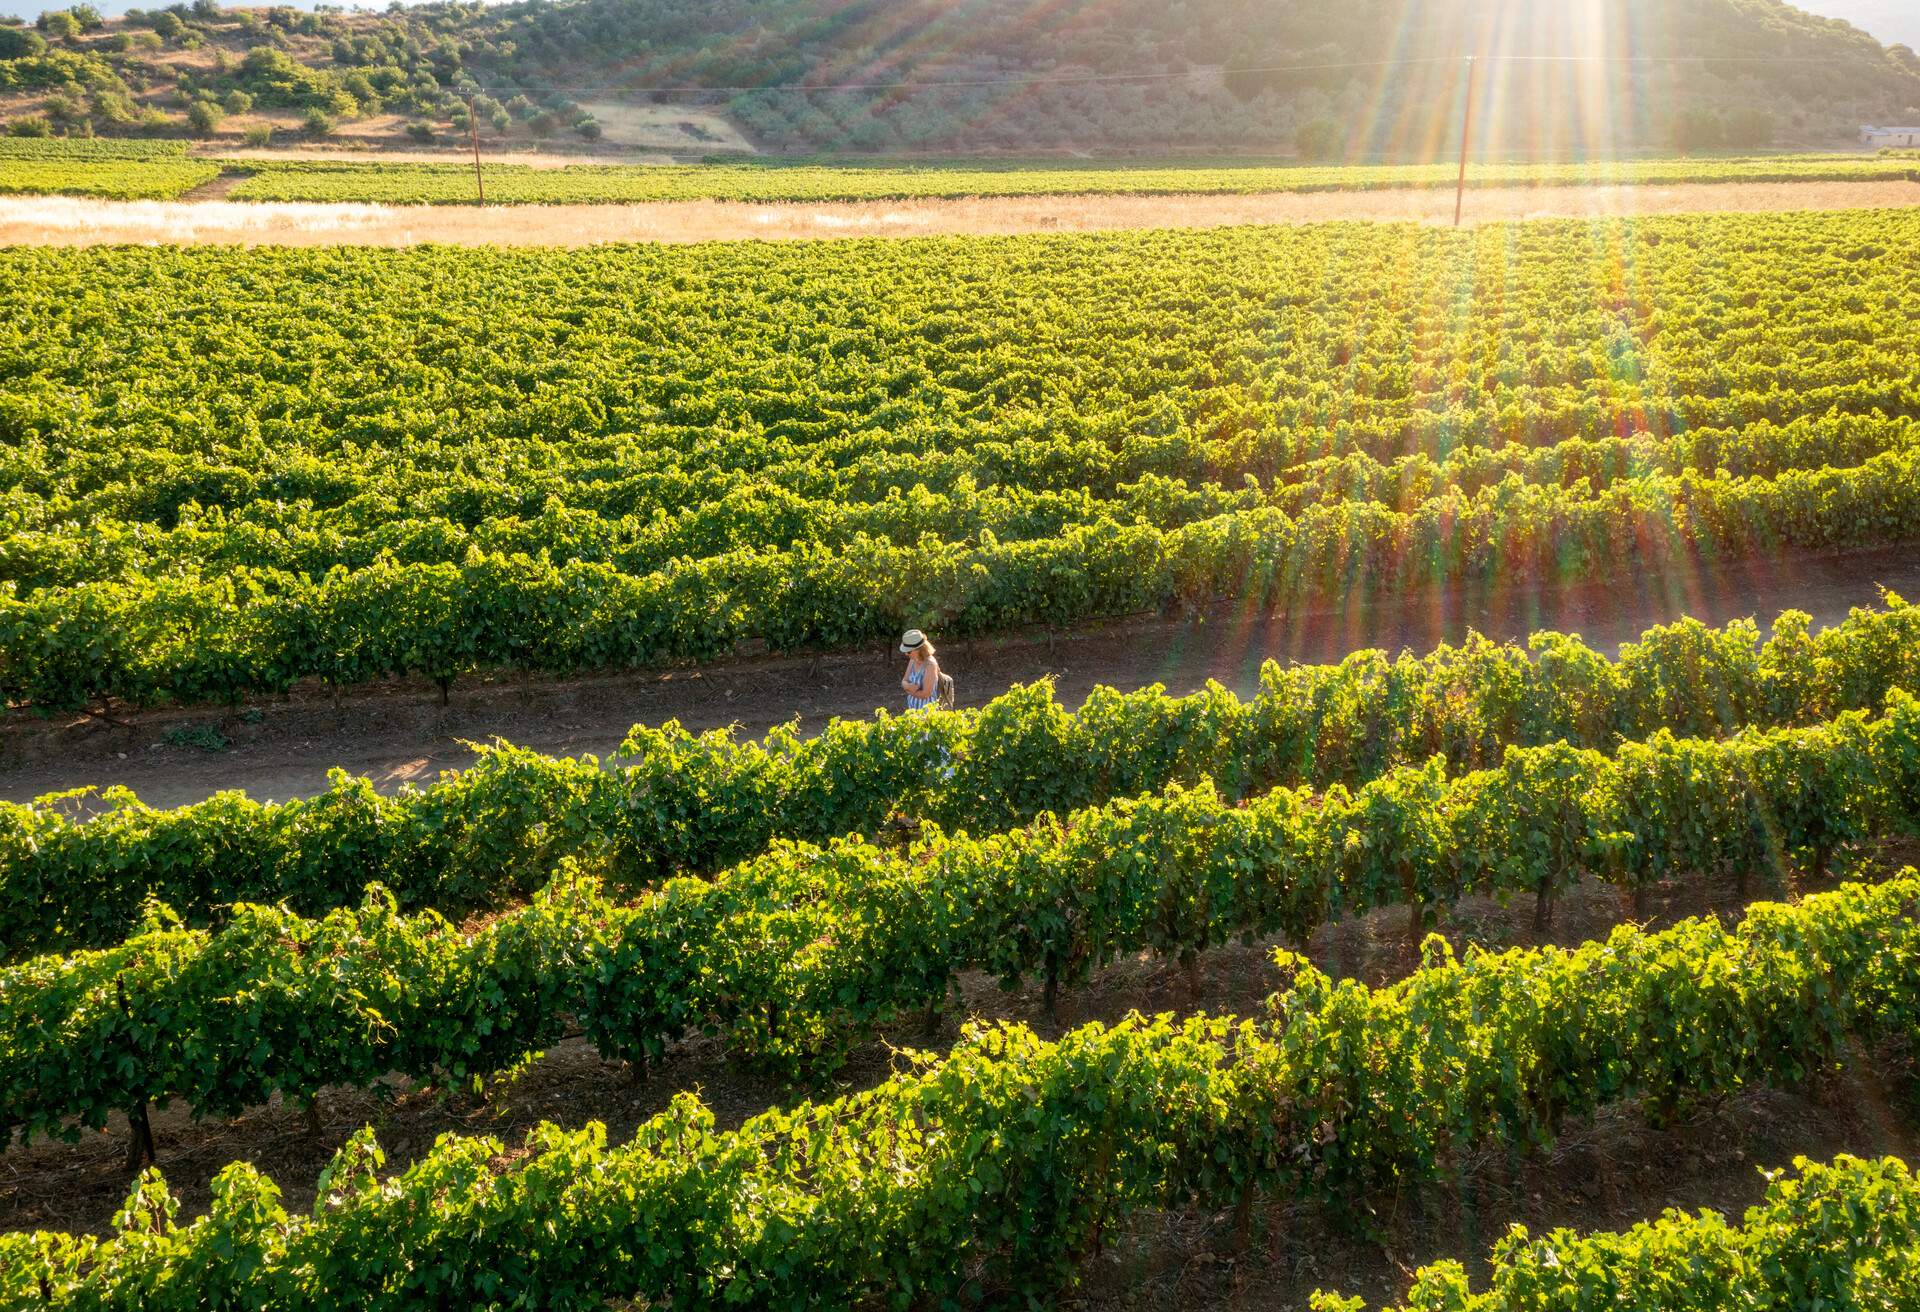 This is a drone photo of woman walking among vineyards in wine producing area of Nemea, Greece.